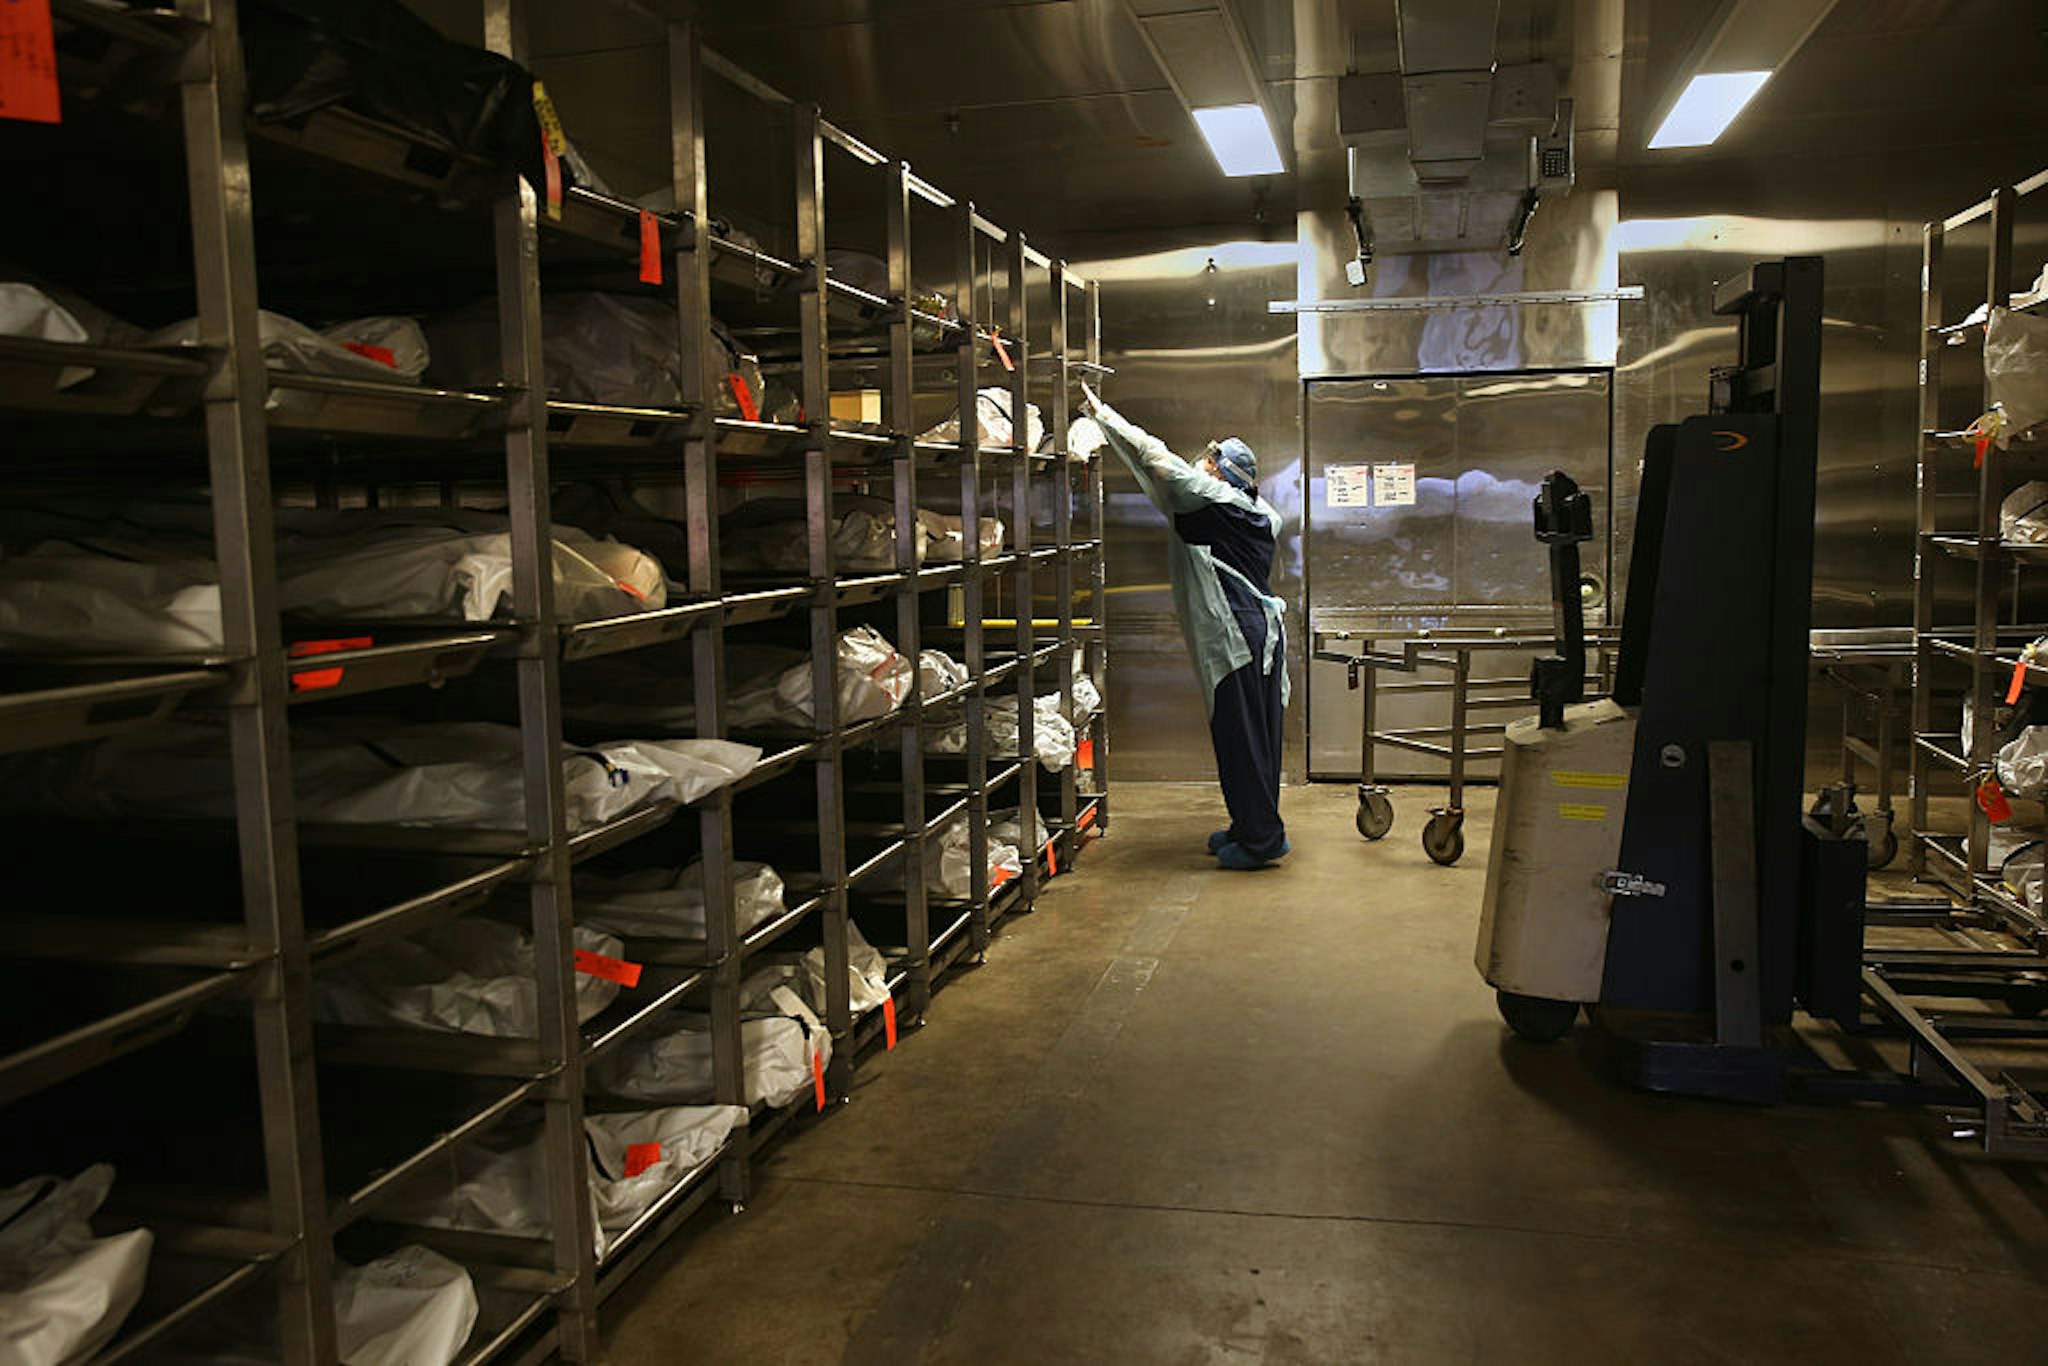 TUCSON, AZ - DECEMBER 09: Forensic technician Kristine Clor handles human remains in the refrigerated morgue of the Pima County Office of the Medical Examiner on December 9, 2014 in Tucson, Arizona. Forensic anthropologists attempt to identify the deceased by studying personal effects and bodily remains. Most are from undocumented immigrants, many of whom died of dehydration while crossing illegally into the U.S. from Mexico. The center currently has 90 bodies in the morgue and, on average, receives 176 per year, most found by ranchers and Border Patrol agents. Identified remains are repatriated, along with personal items, to their home countries, and the others will be cremated. (Photo by John Moore/Getty Images)